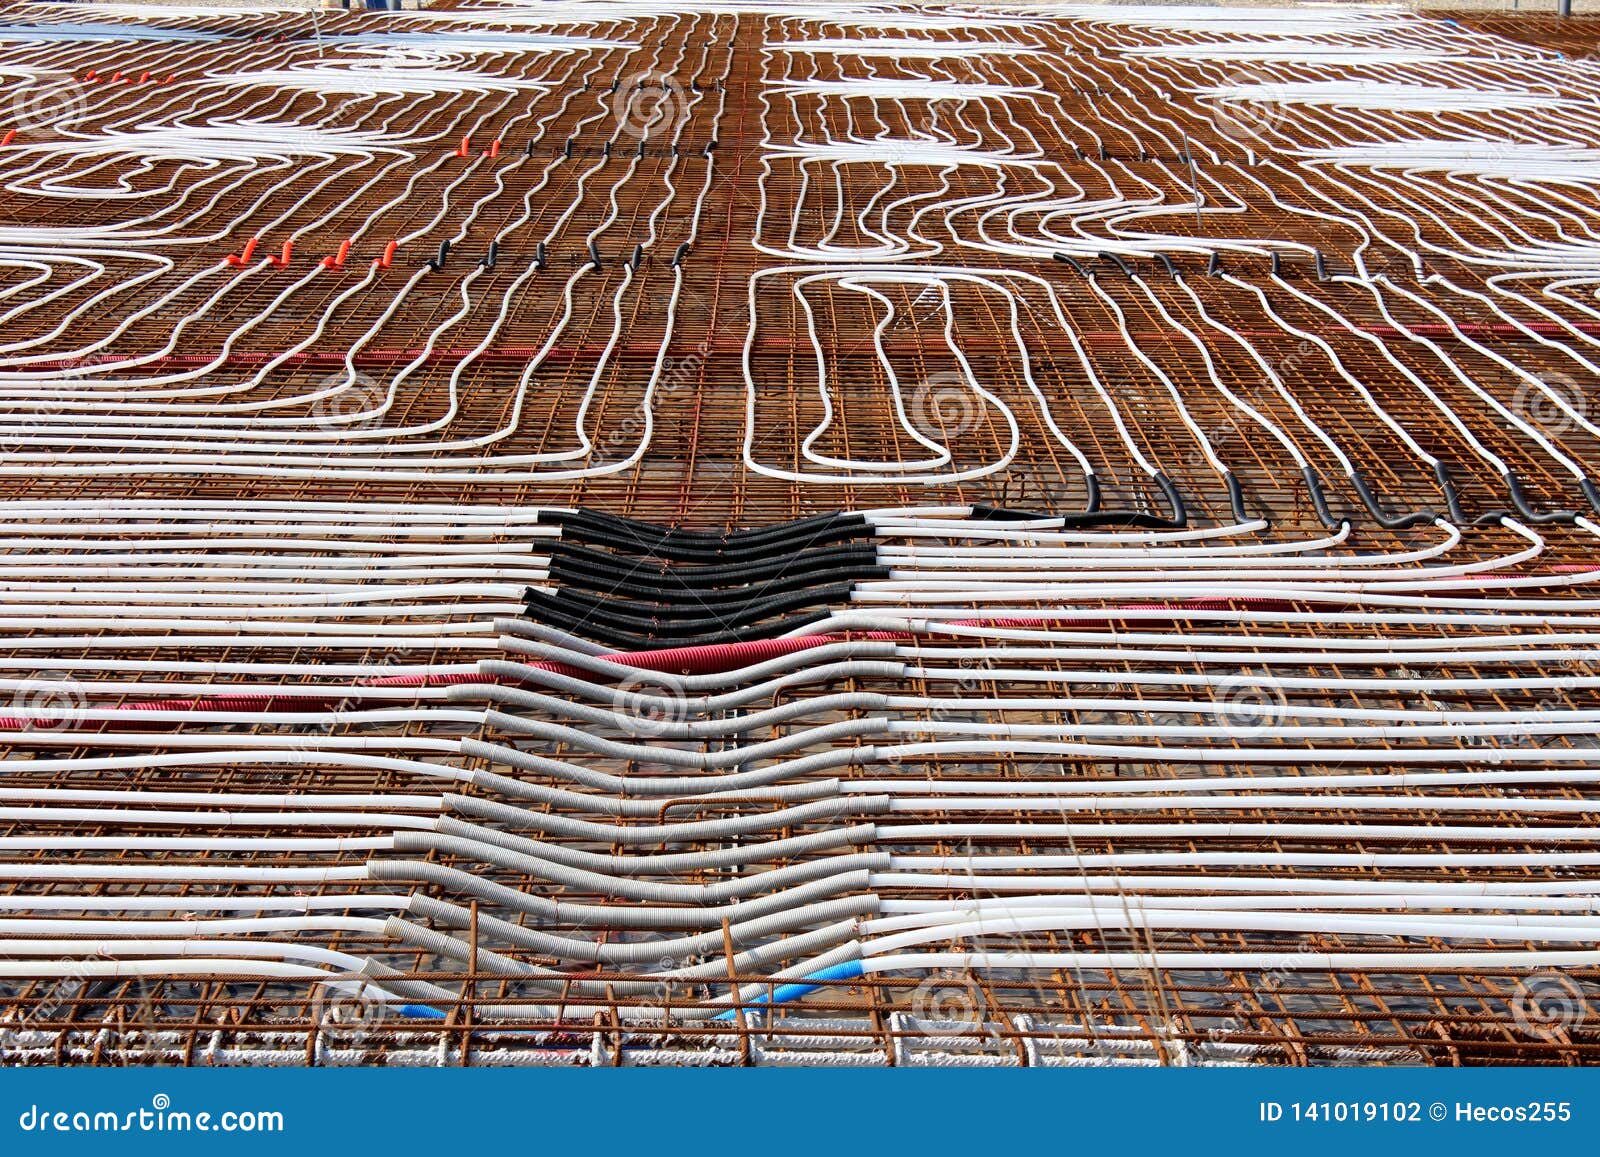 radiant floor heating system being installed at building construction site with densely laid plastic water pipes on top of rusted